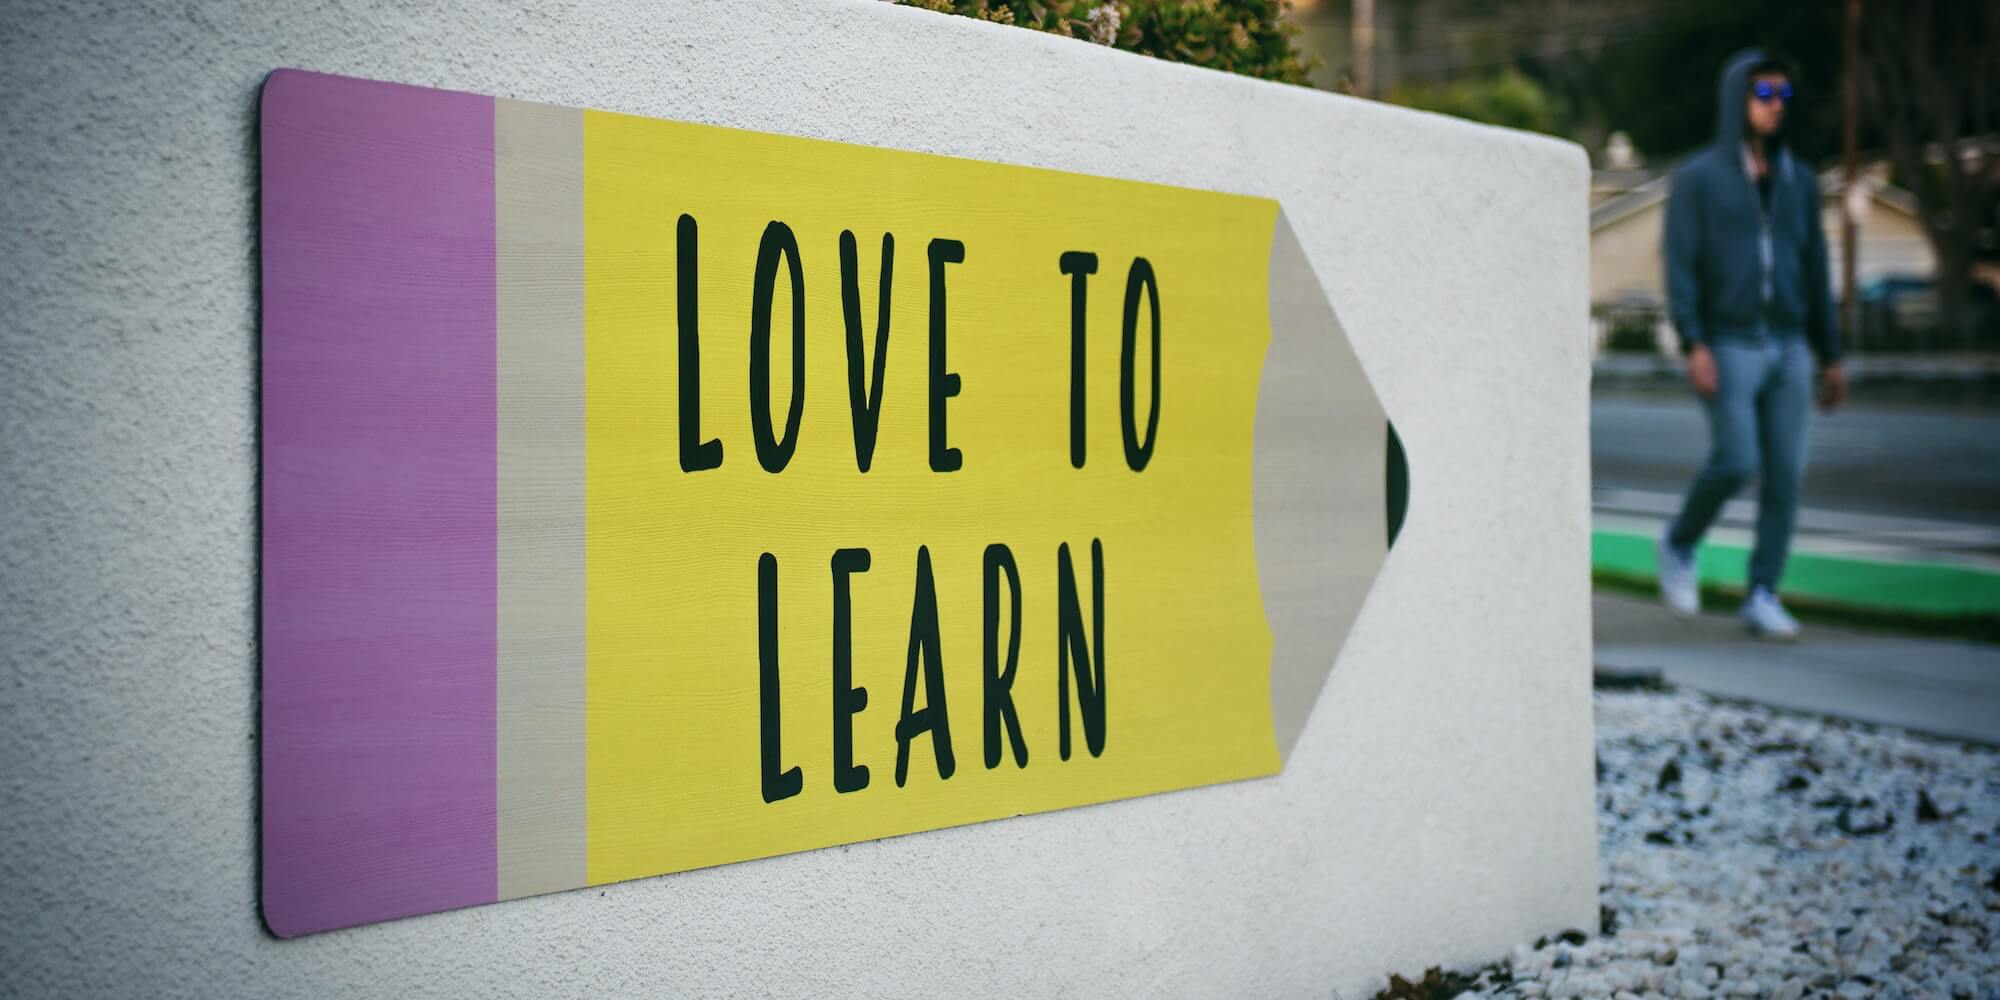 Photo shows a sign shaped like a pencil that says 'Love to Learn'. Image from Unsplash (Photographer is Tim Mossholder)